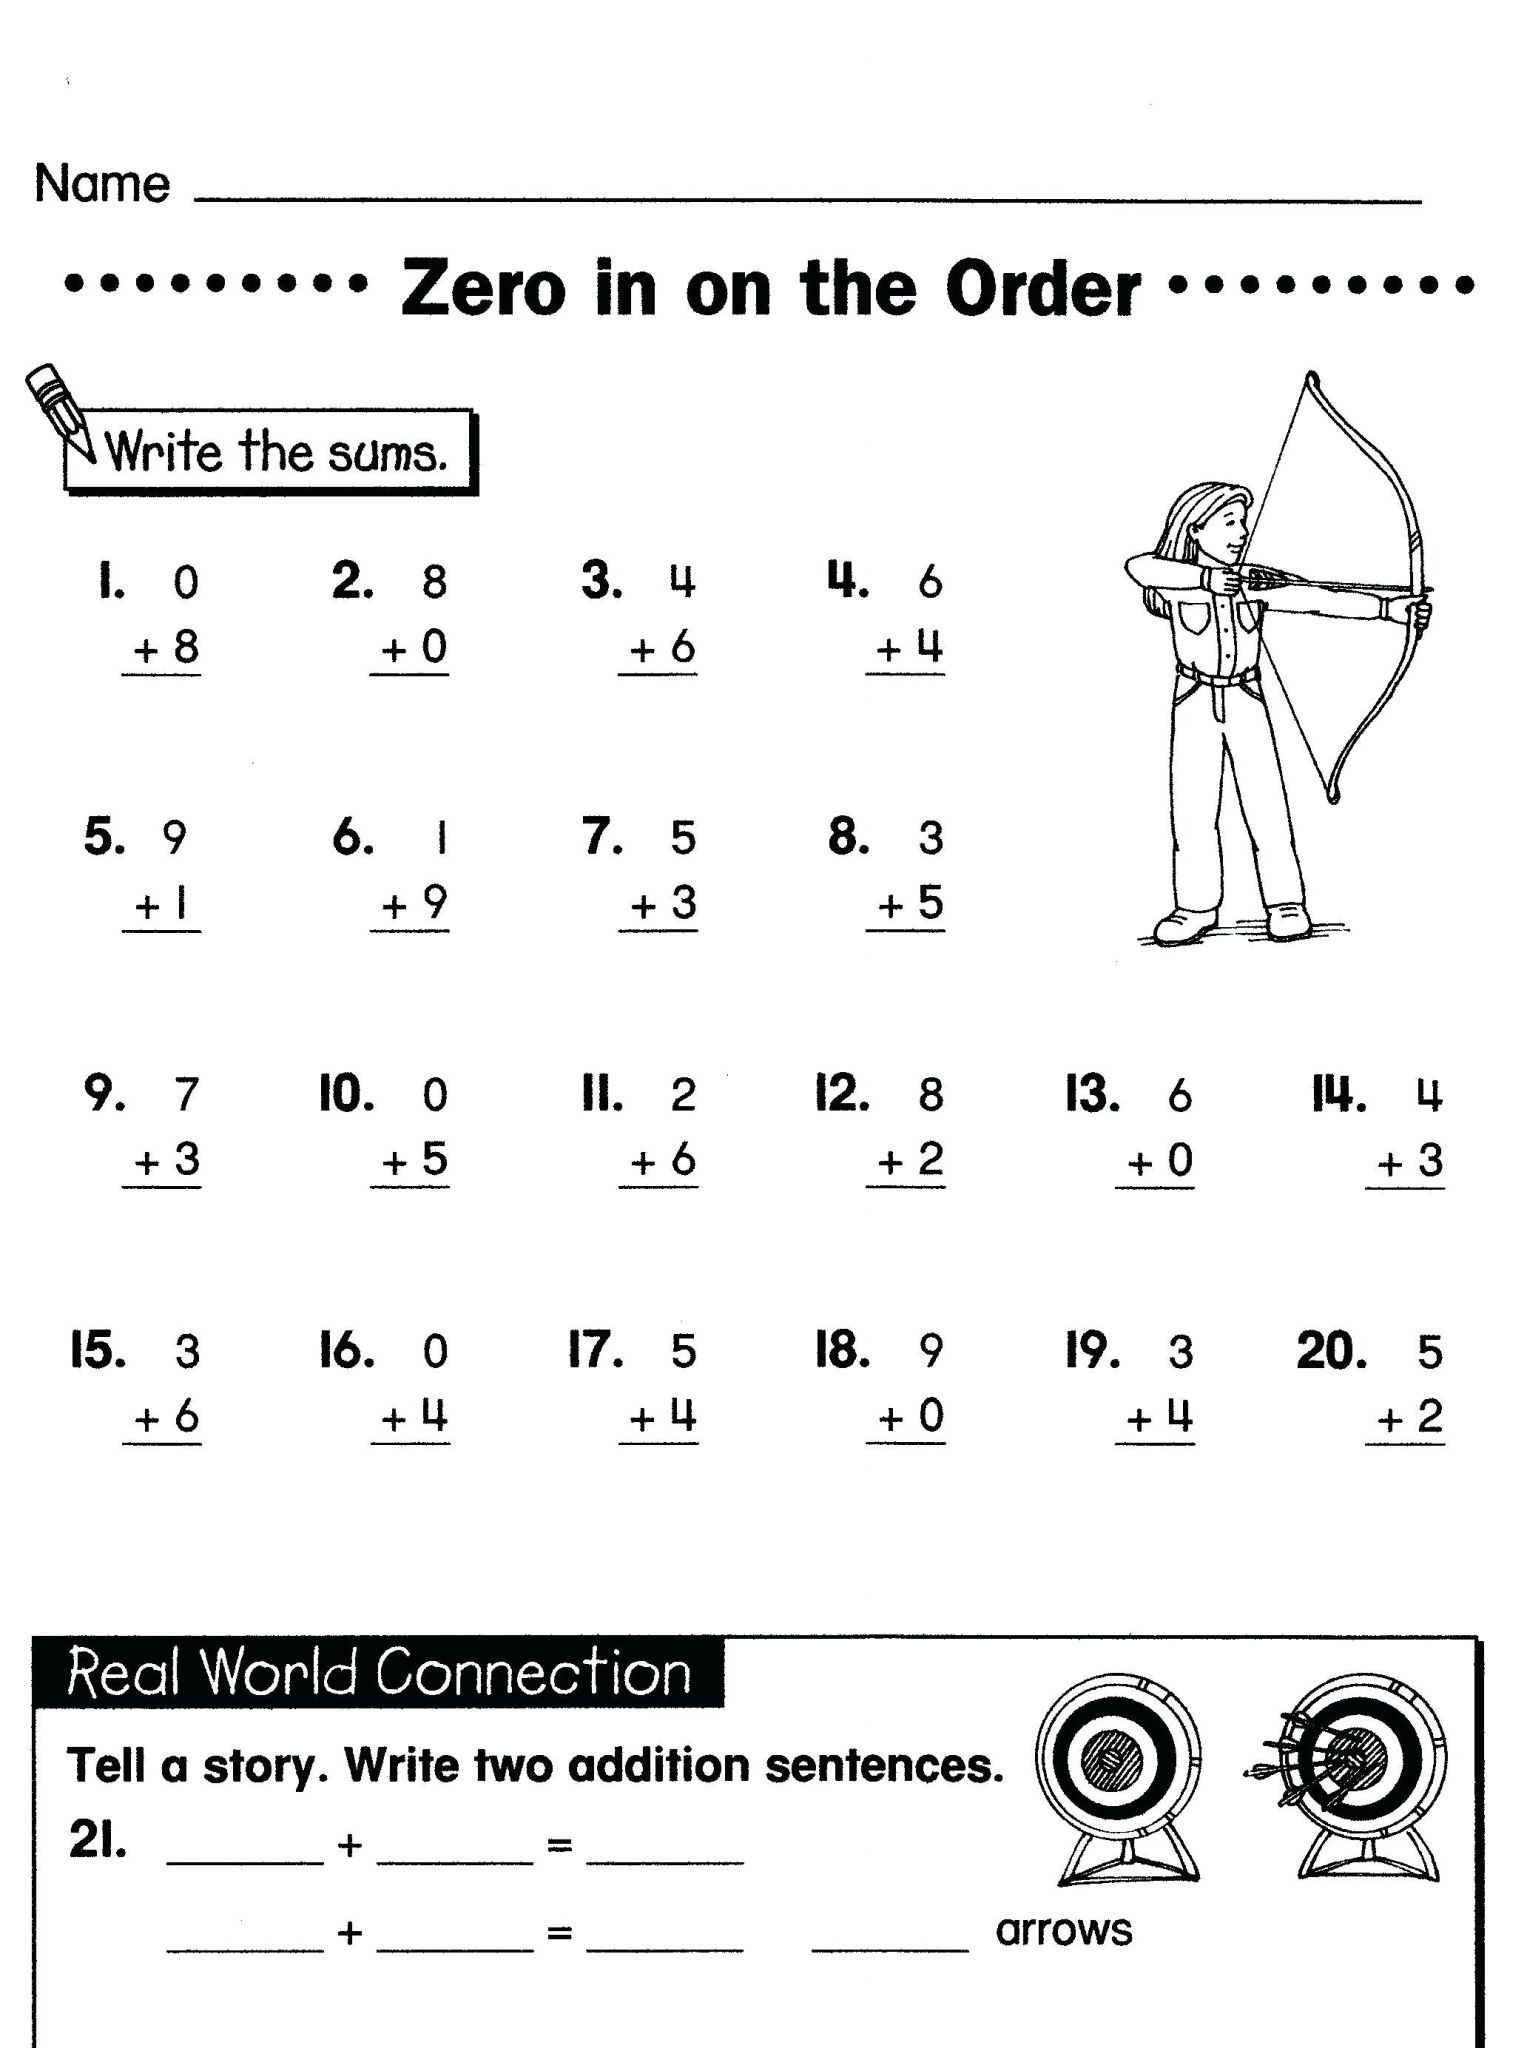 4-free-math-worksheets-second-grade-2-skip-counting-skip-counting-by-50-amp